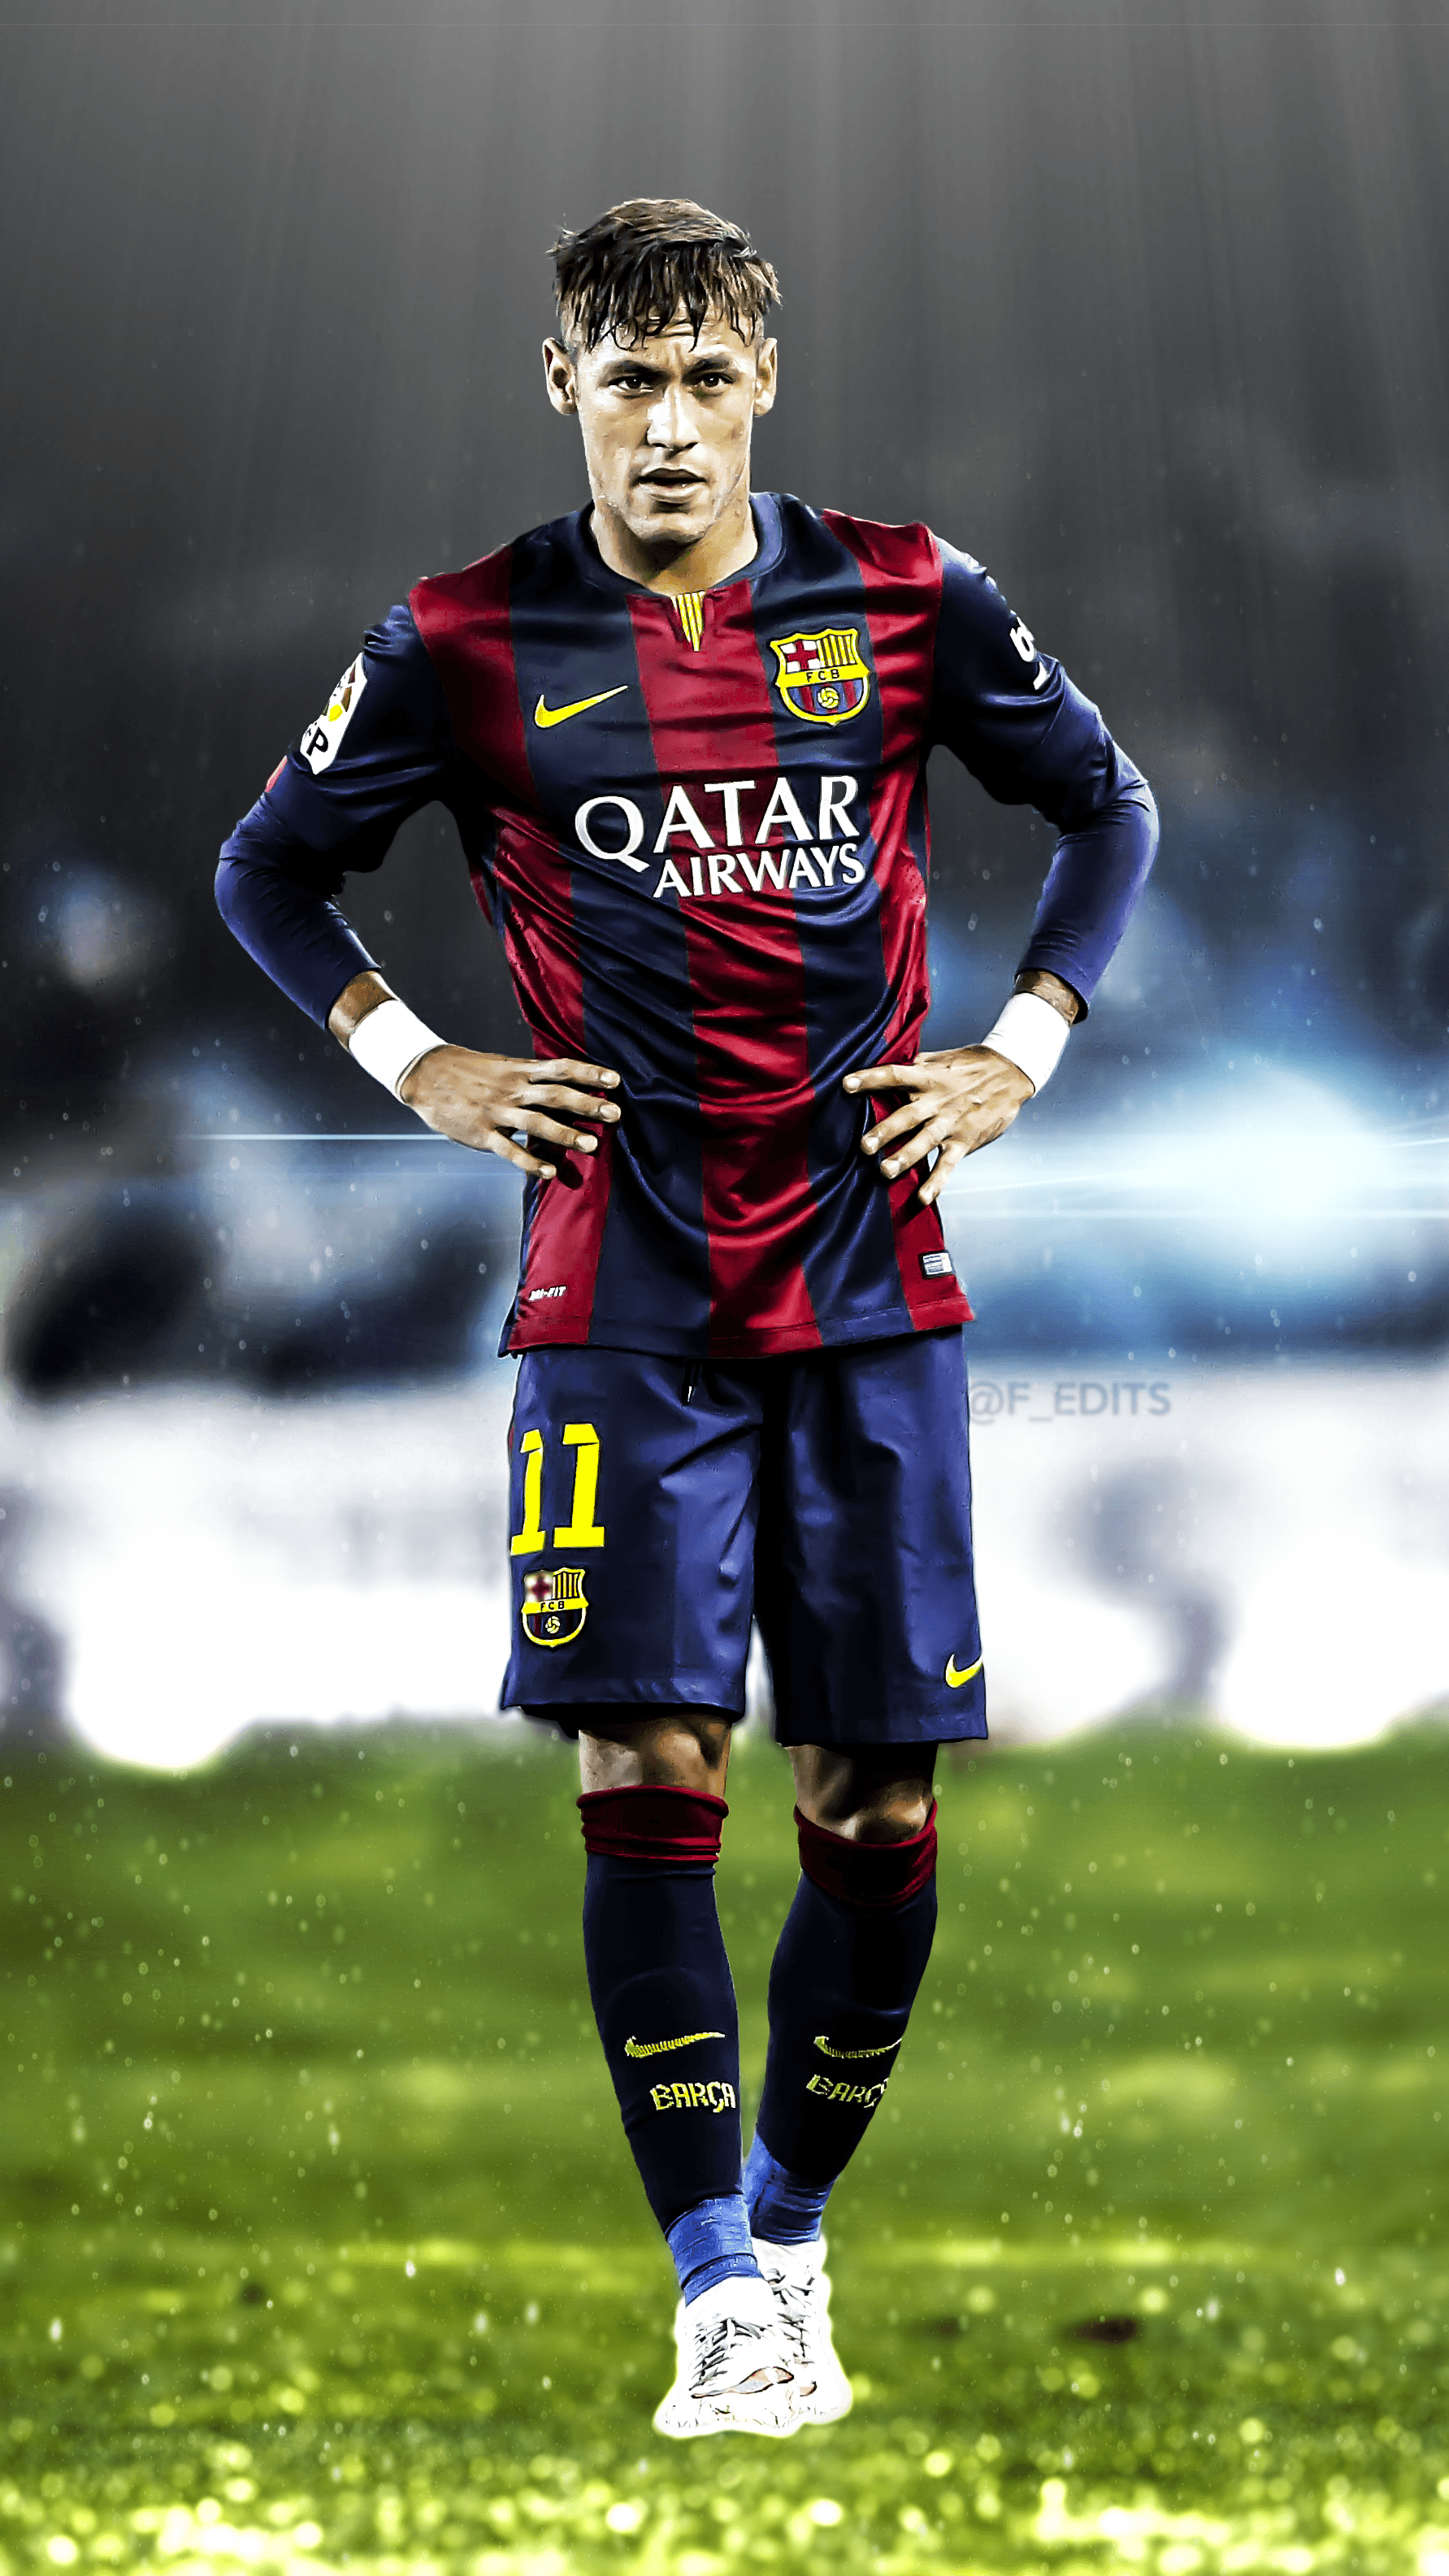 Neymar Wallpapers For Android - Wallpaper Cave